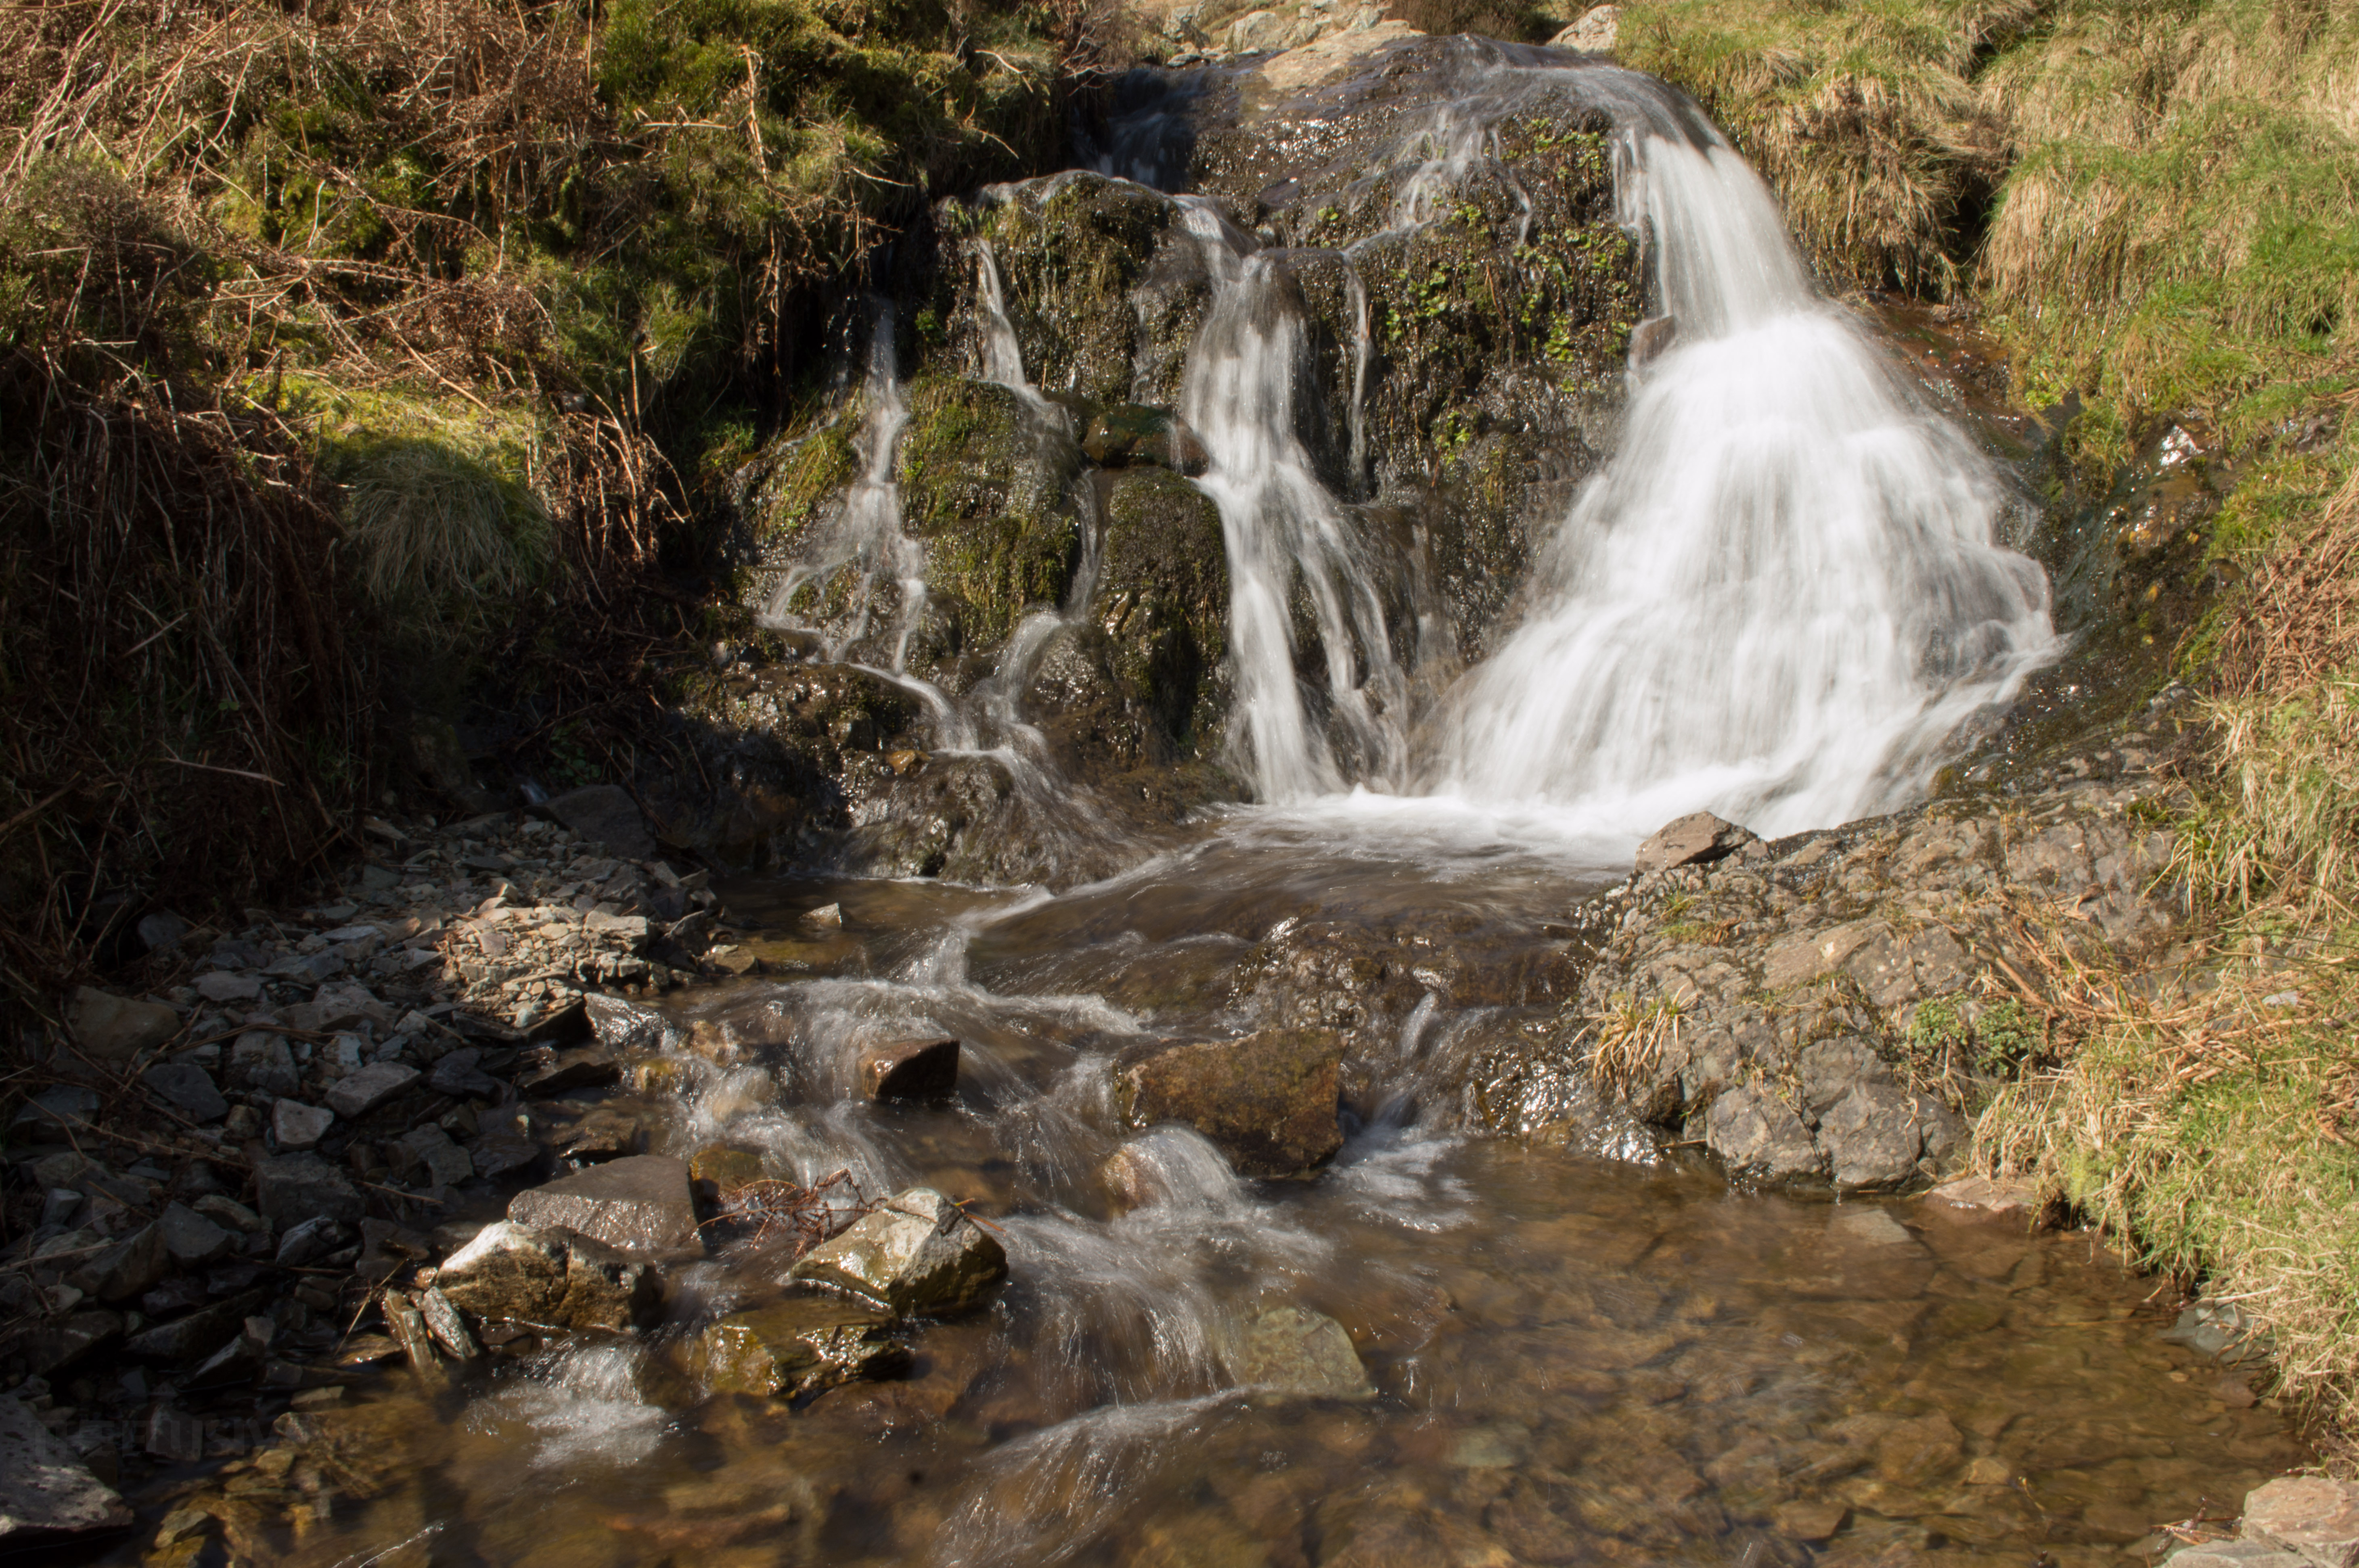 cardingmill valley waterfall (48 of 218)